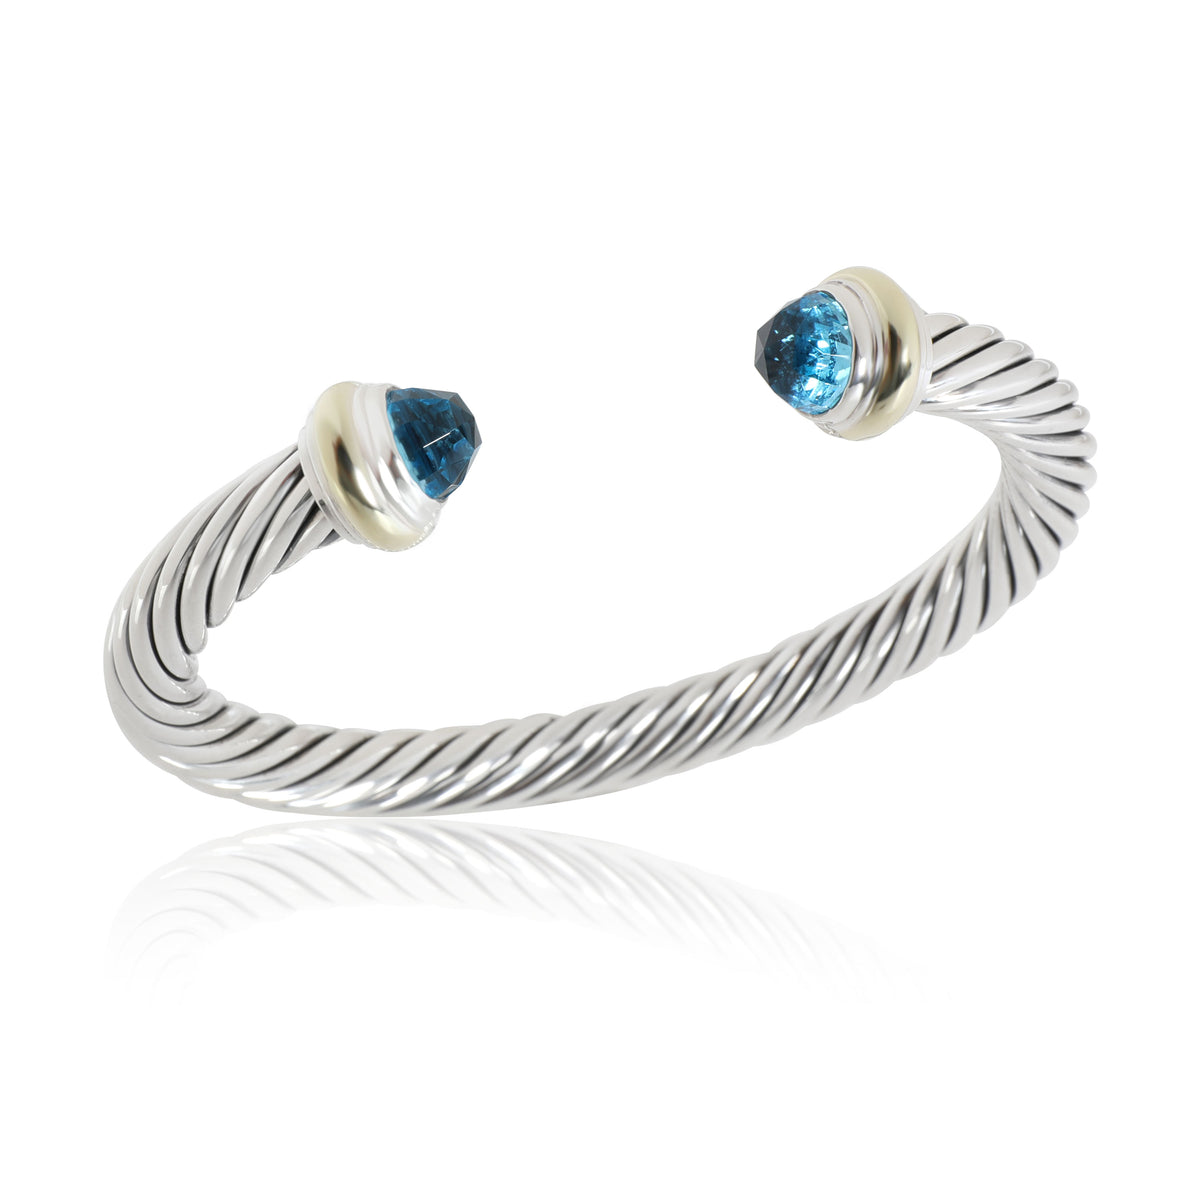 David Yurman Cable Bangle with Blue Topaz in 14K Gold/Sterling Silver Blue